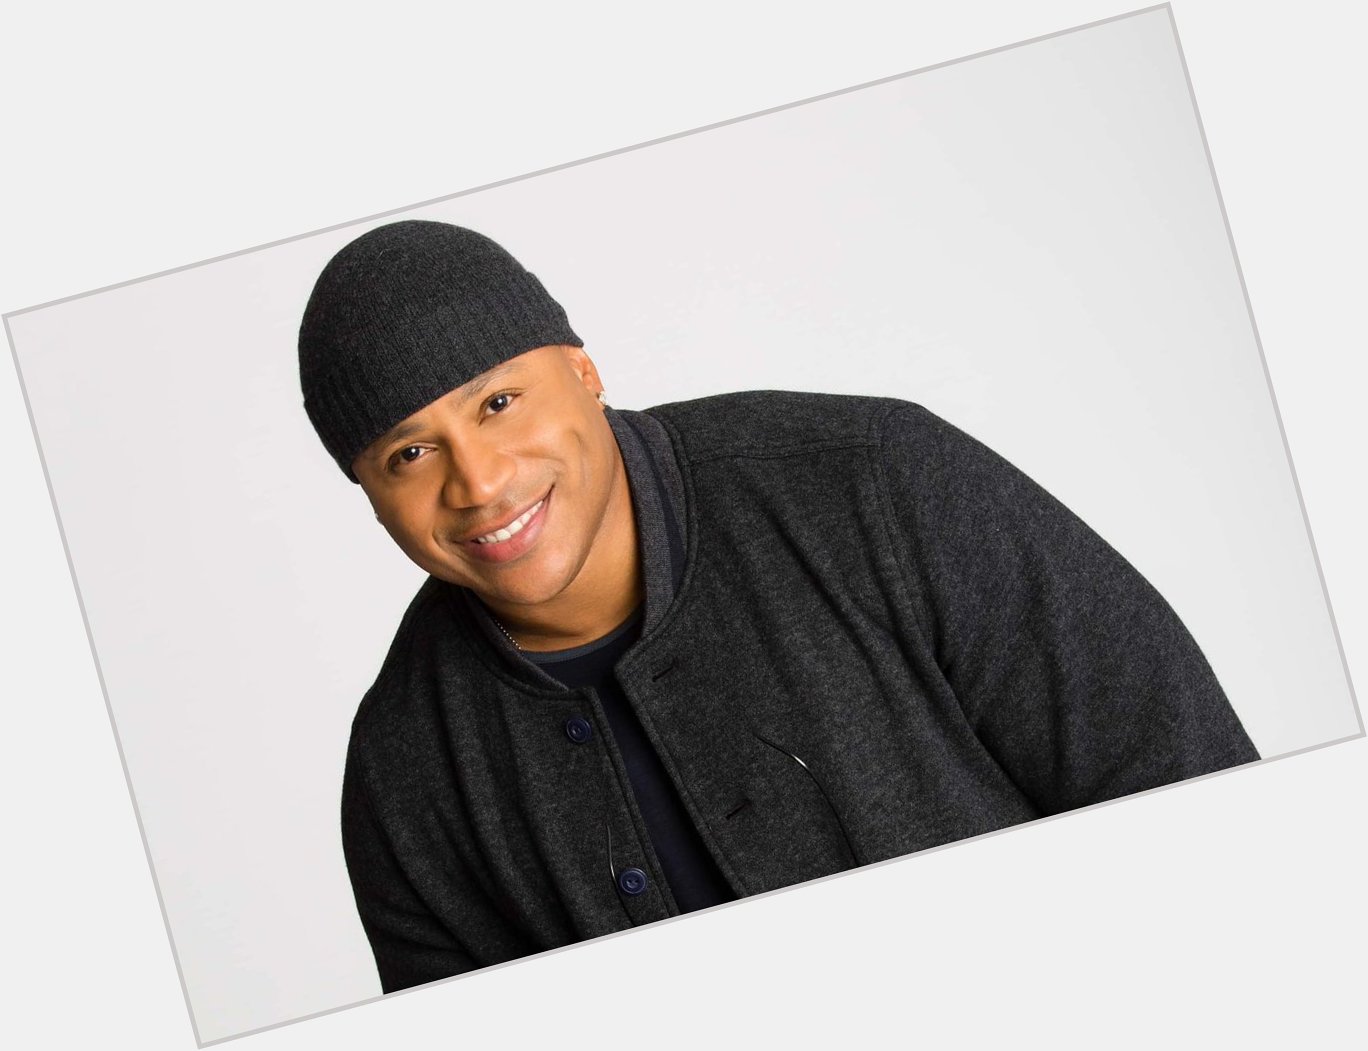 Wishing a Happy 53rd Birthday to LL Cool J  . What s your favorite LL Cool J classic?  